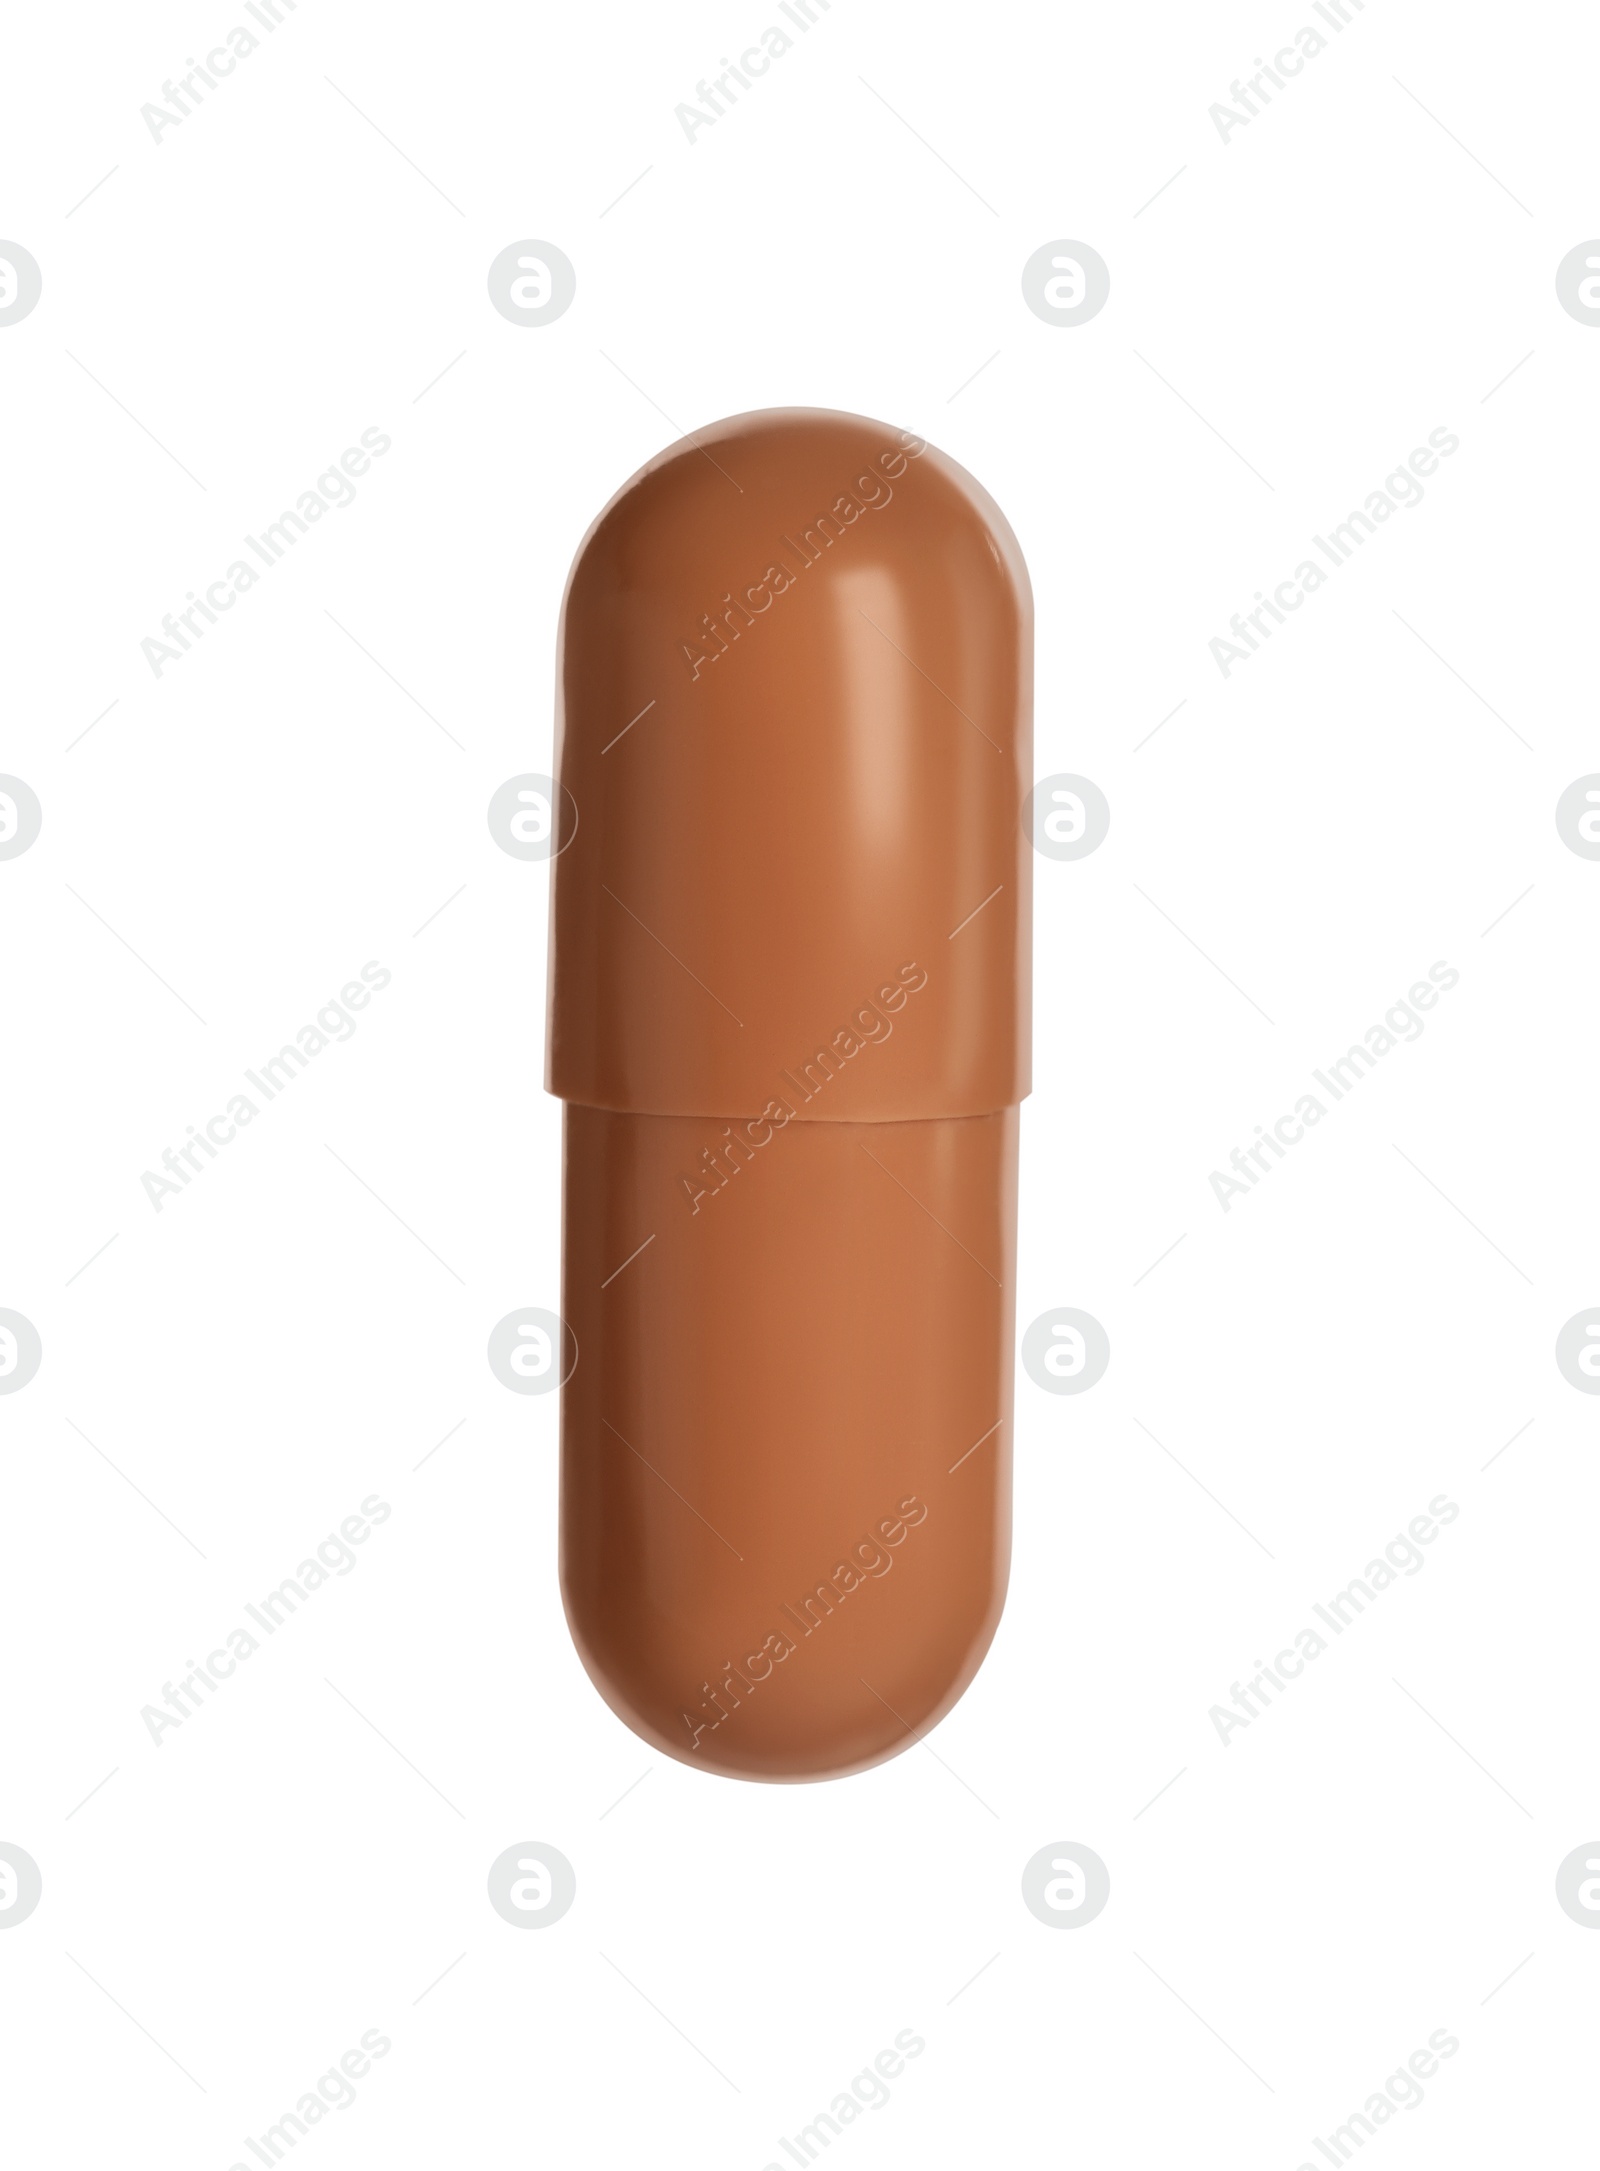 Photo of One brown pill on white background. Medicinal treatment